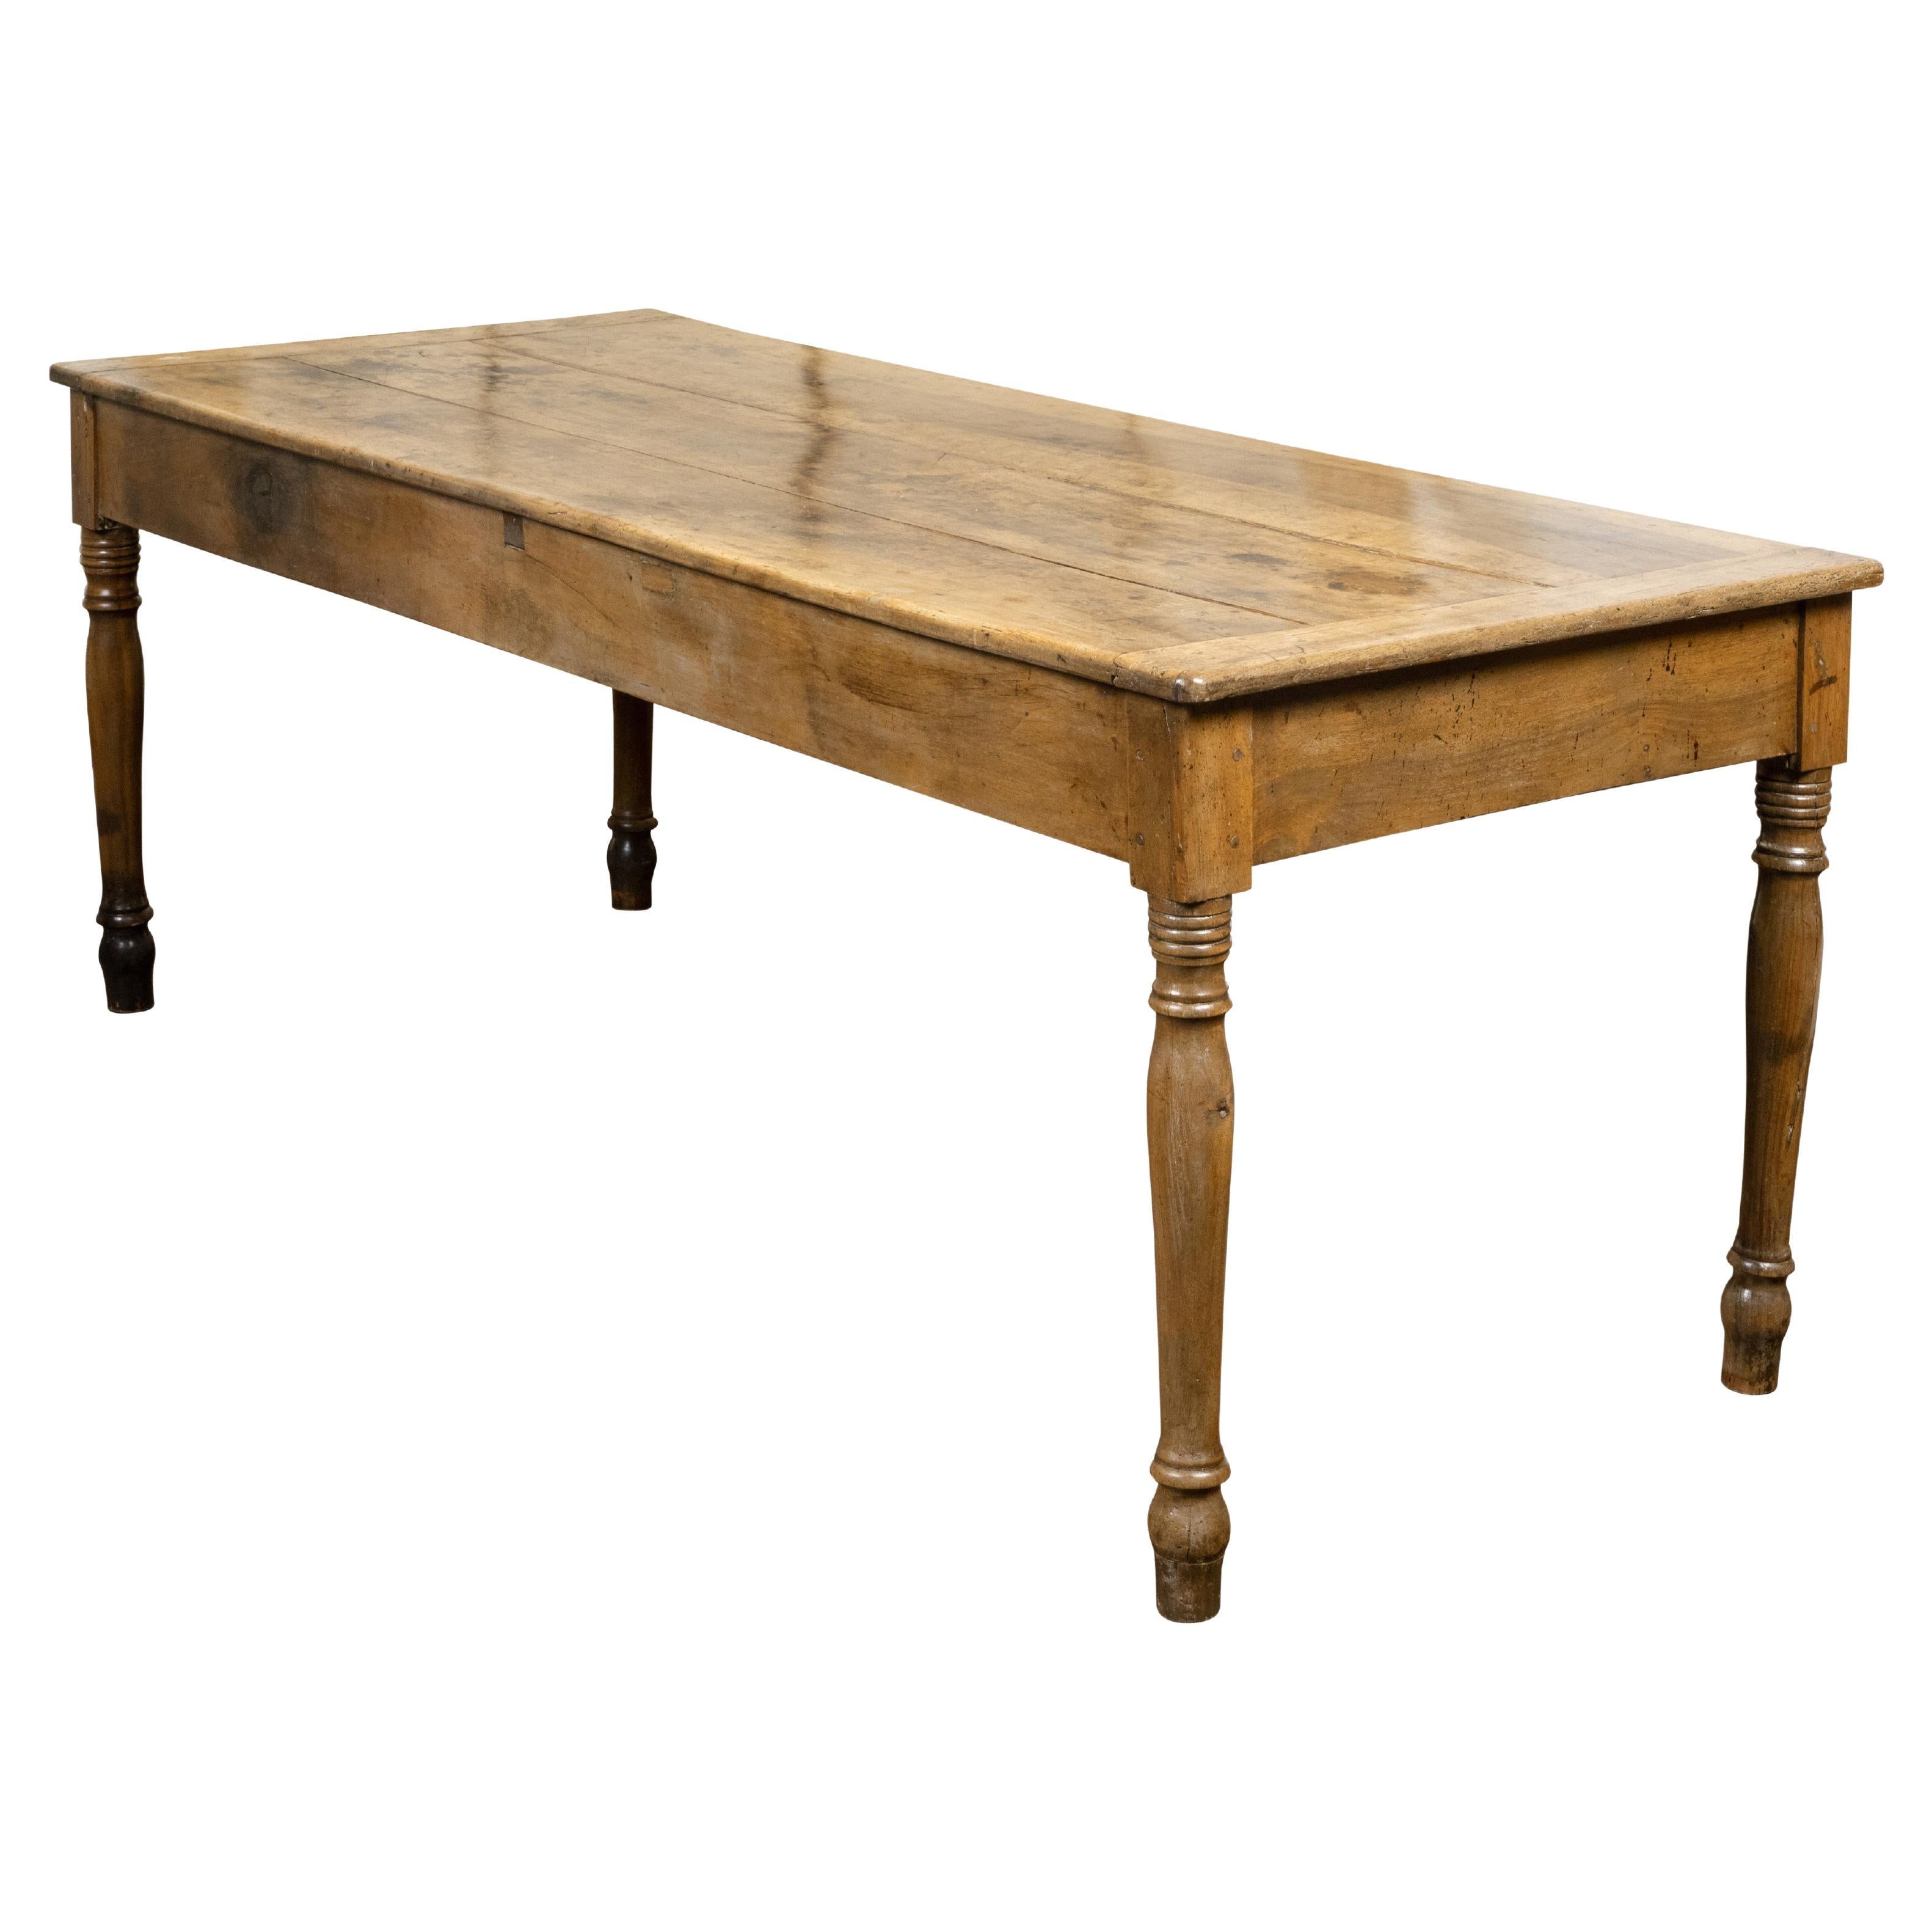 French 19th Century Walnut Farm Table with Turned Legs and Distressed Patina For Sale